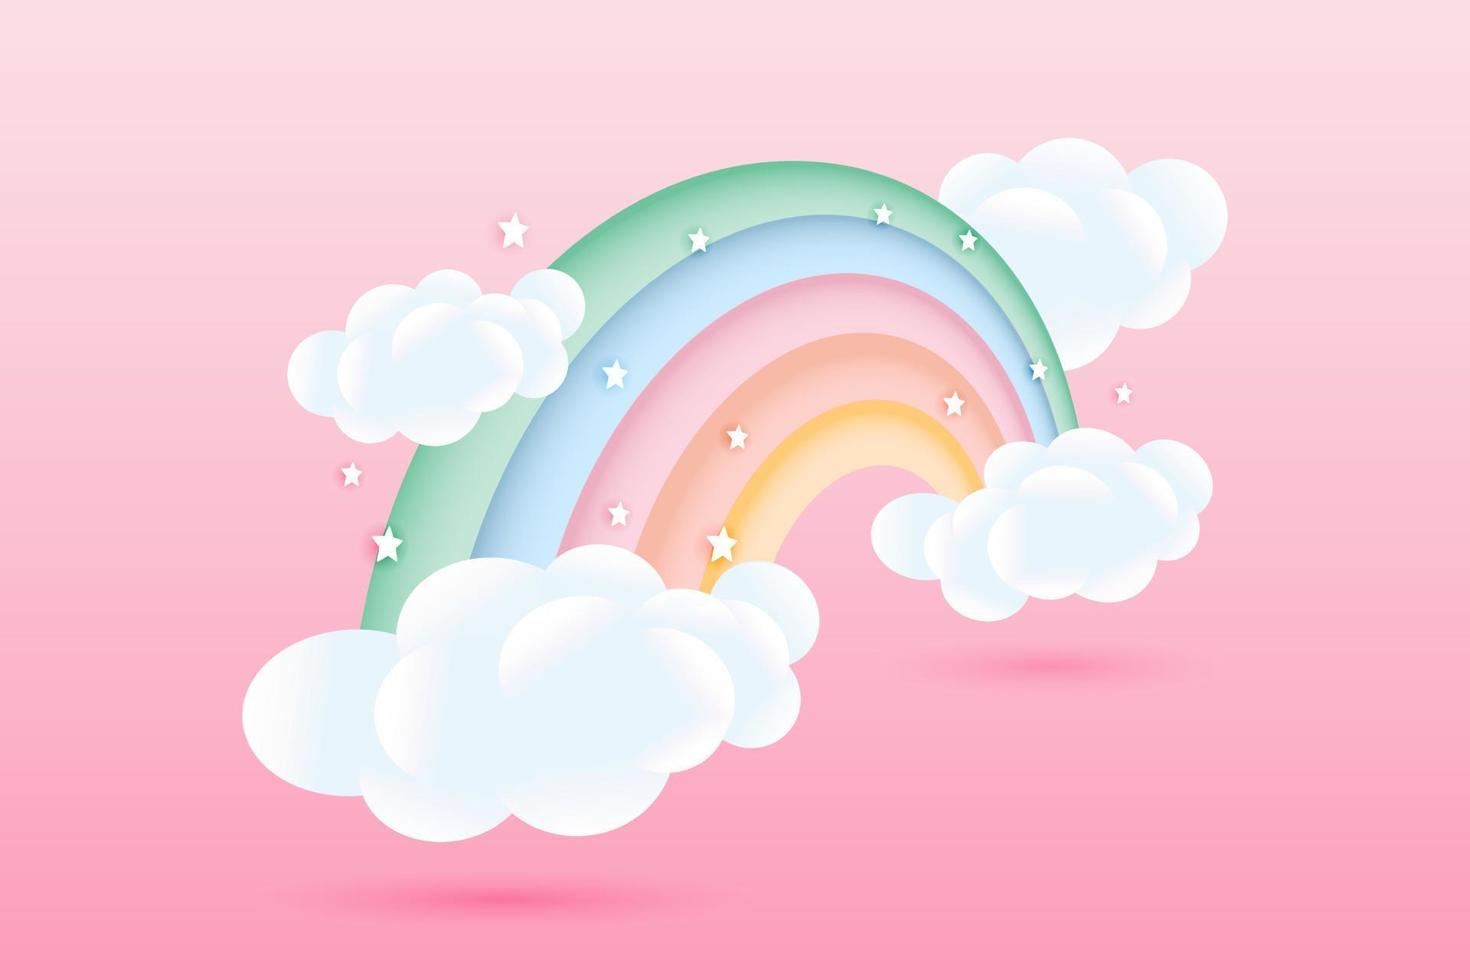 3d baby shower, rainbow with clouds and stars on a pink background, childish design in pastel colors. Background, illustration, vector. vector